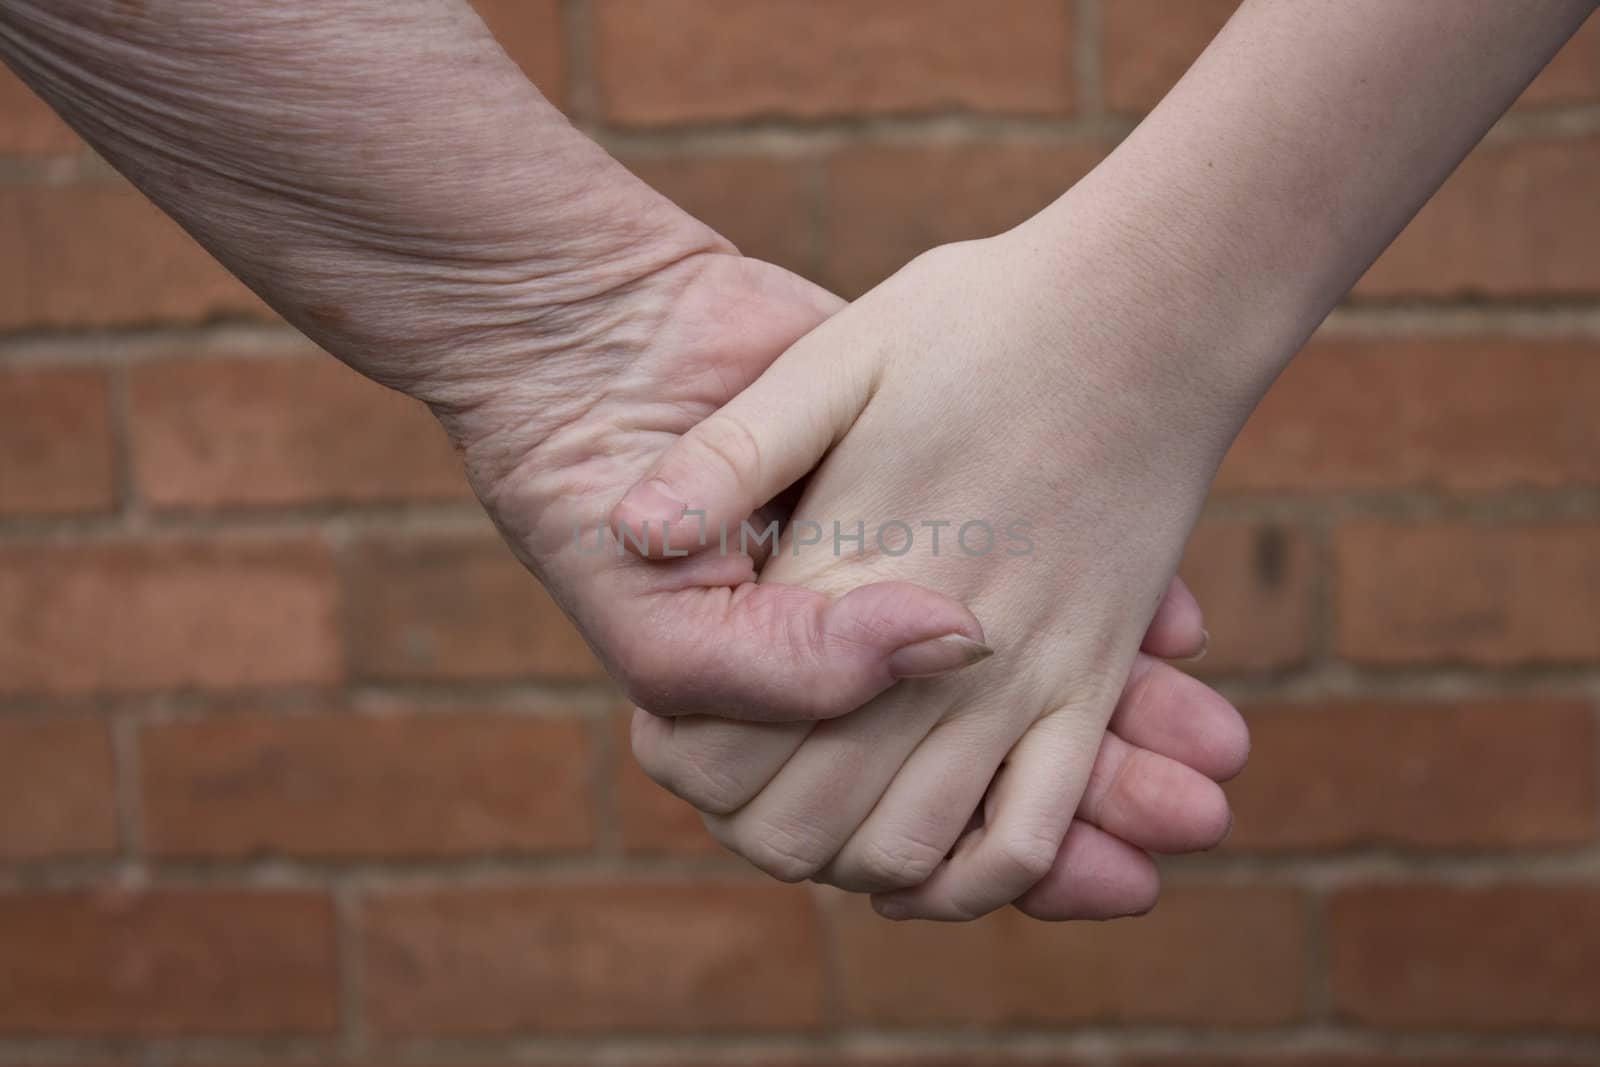 Grandaughter and Grandmother holding hands.